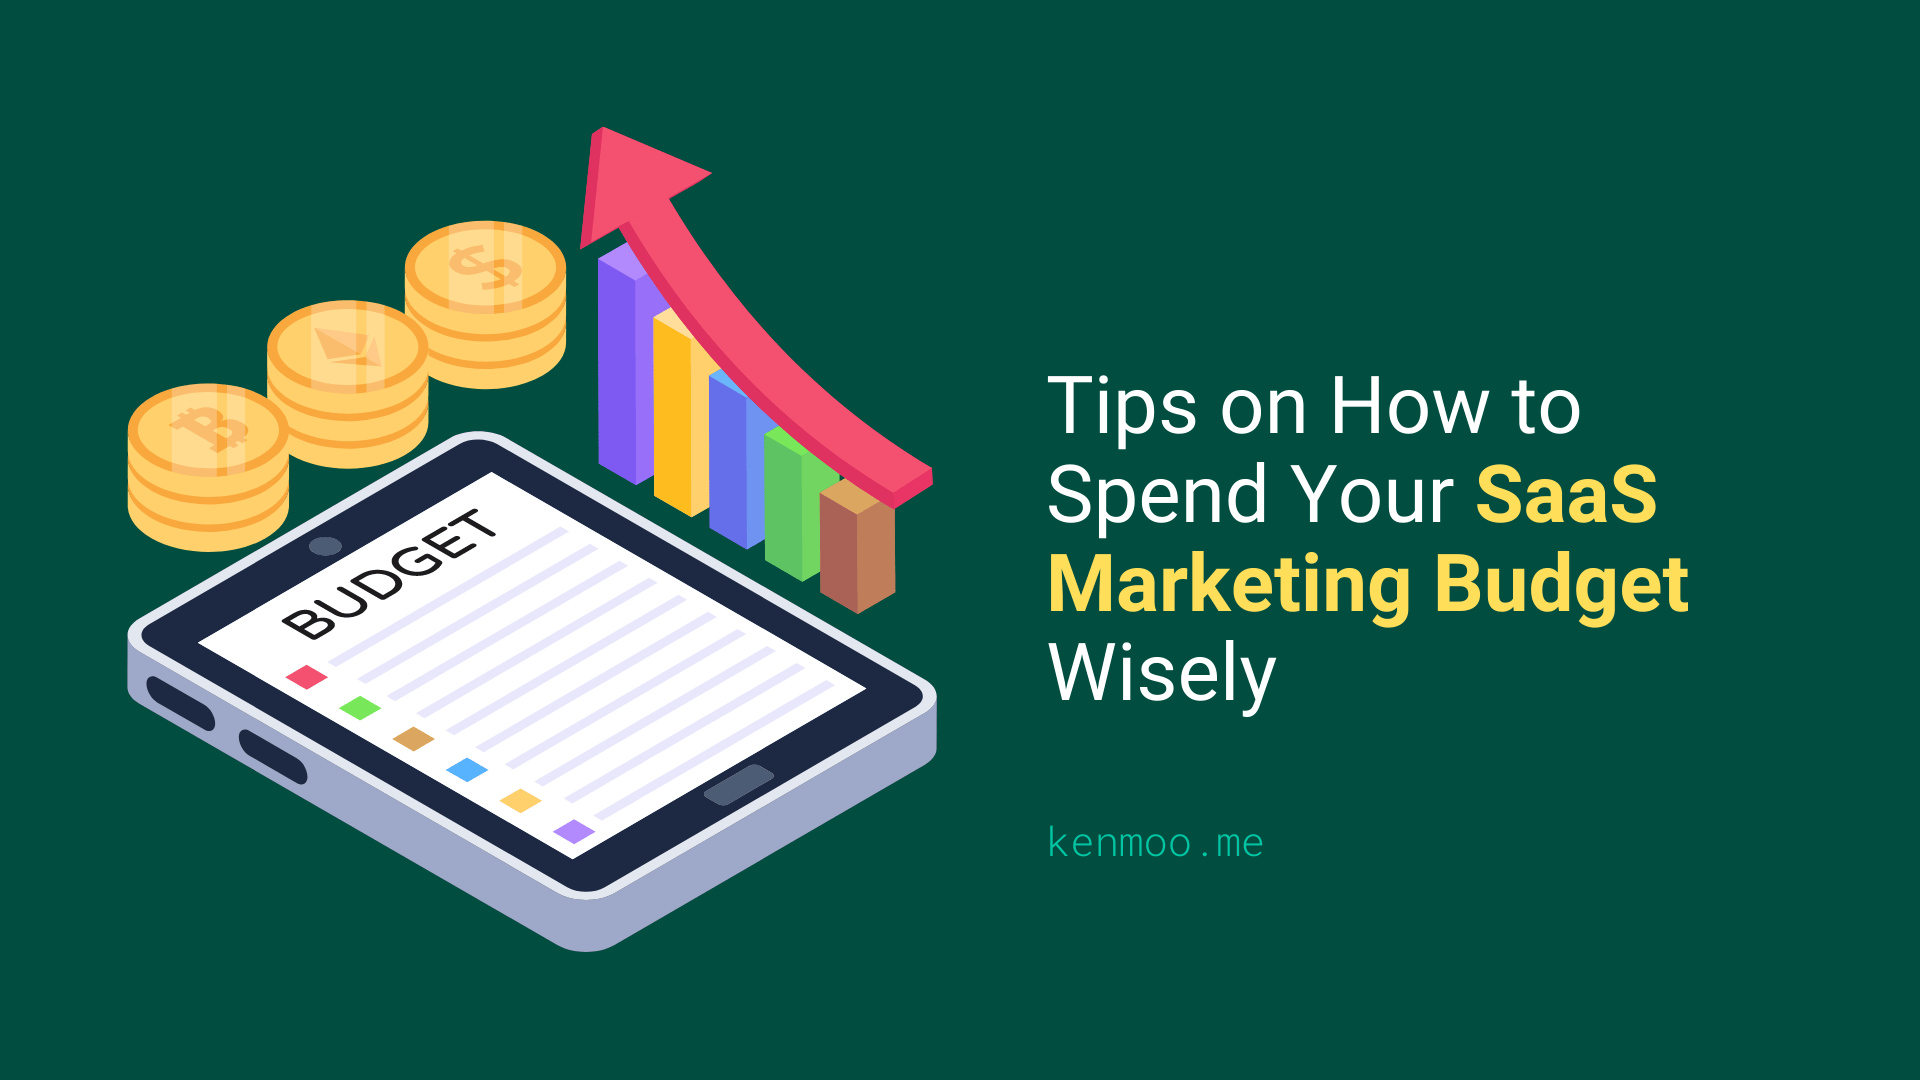 Tips on How to Spend Your SaaS Marketing Budget Wisely